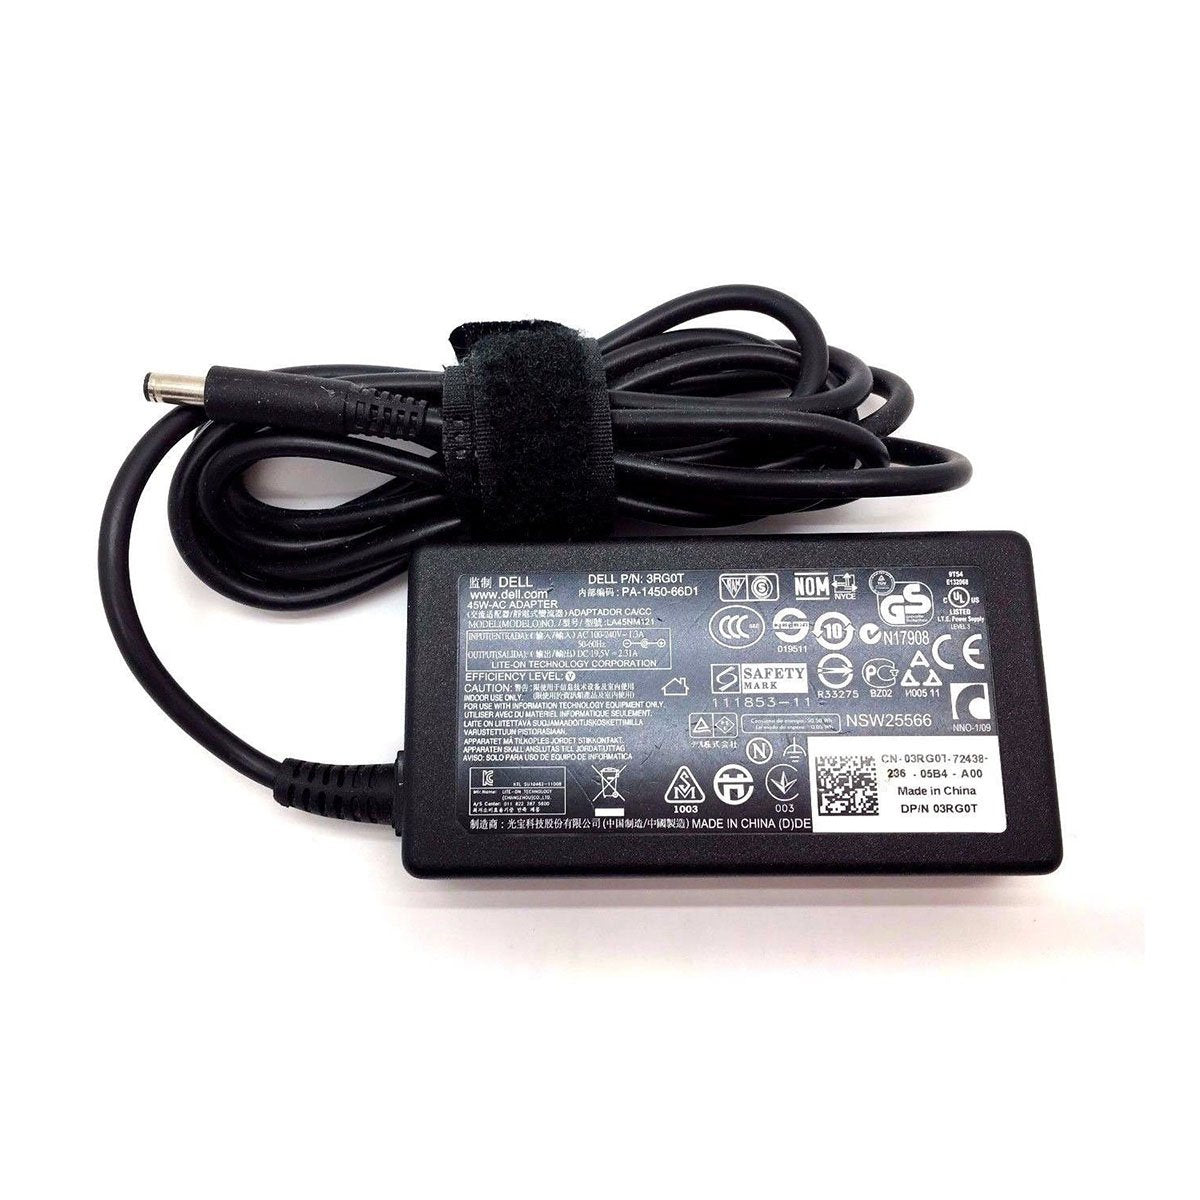 Dell Inspiron 11 3152 Original 45W Laptop Charger Adapter With Power Cord 19.5V 4.5mm Pin